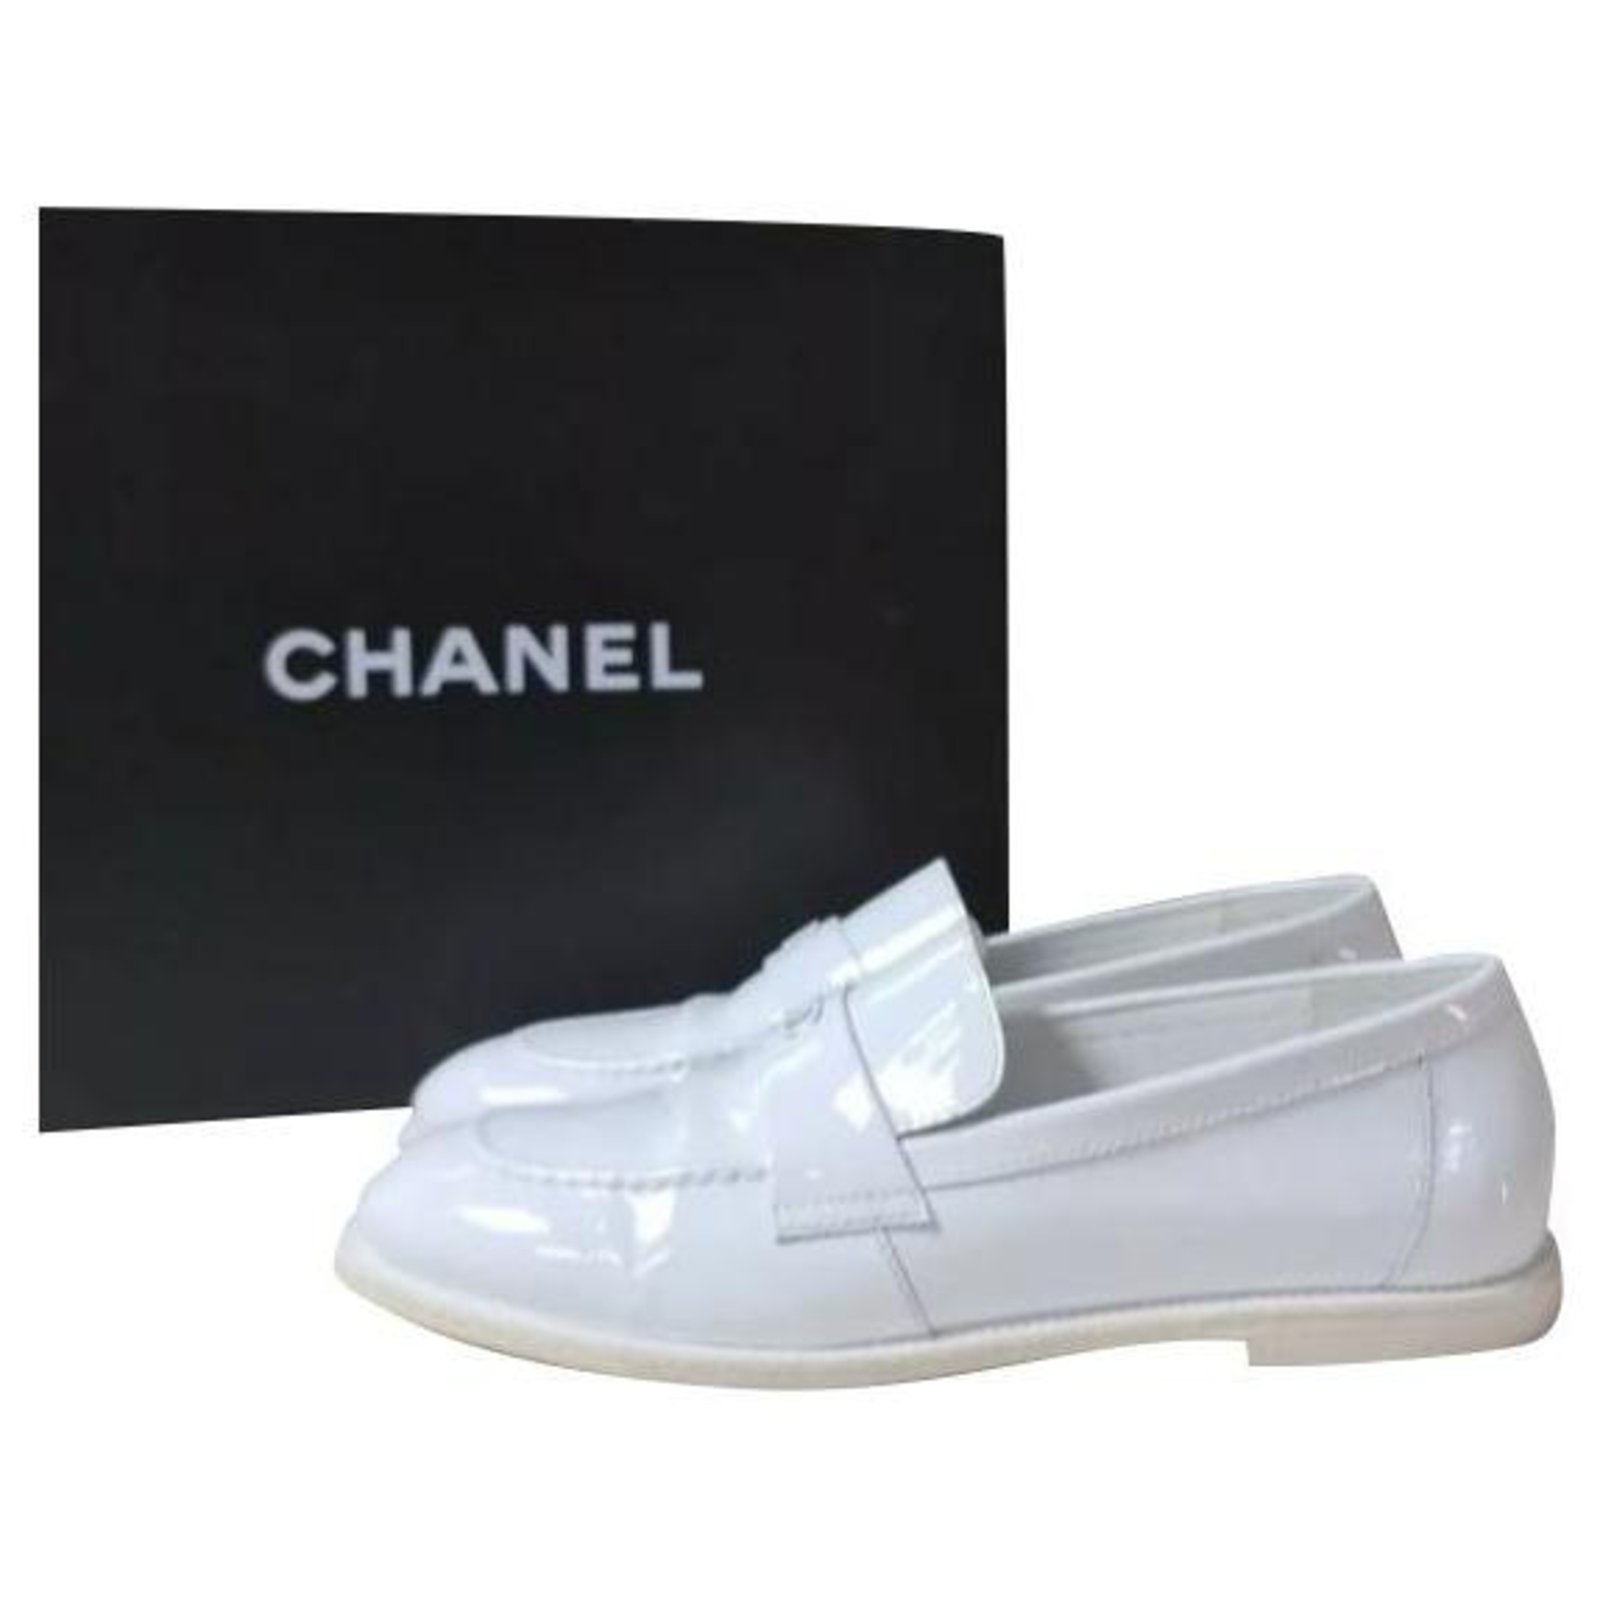 Chanel white loafer  Oxford shoes men Loafers men Shoes mens